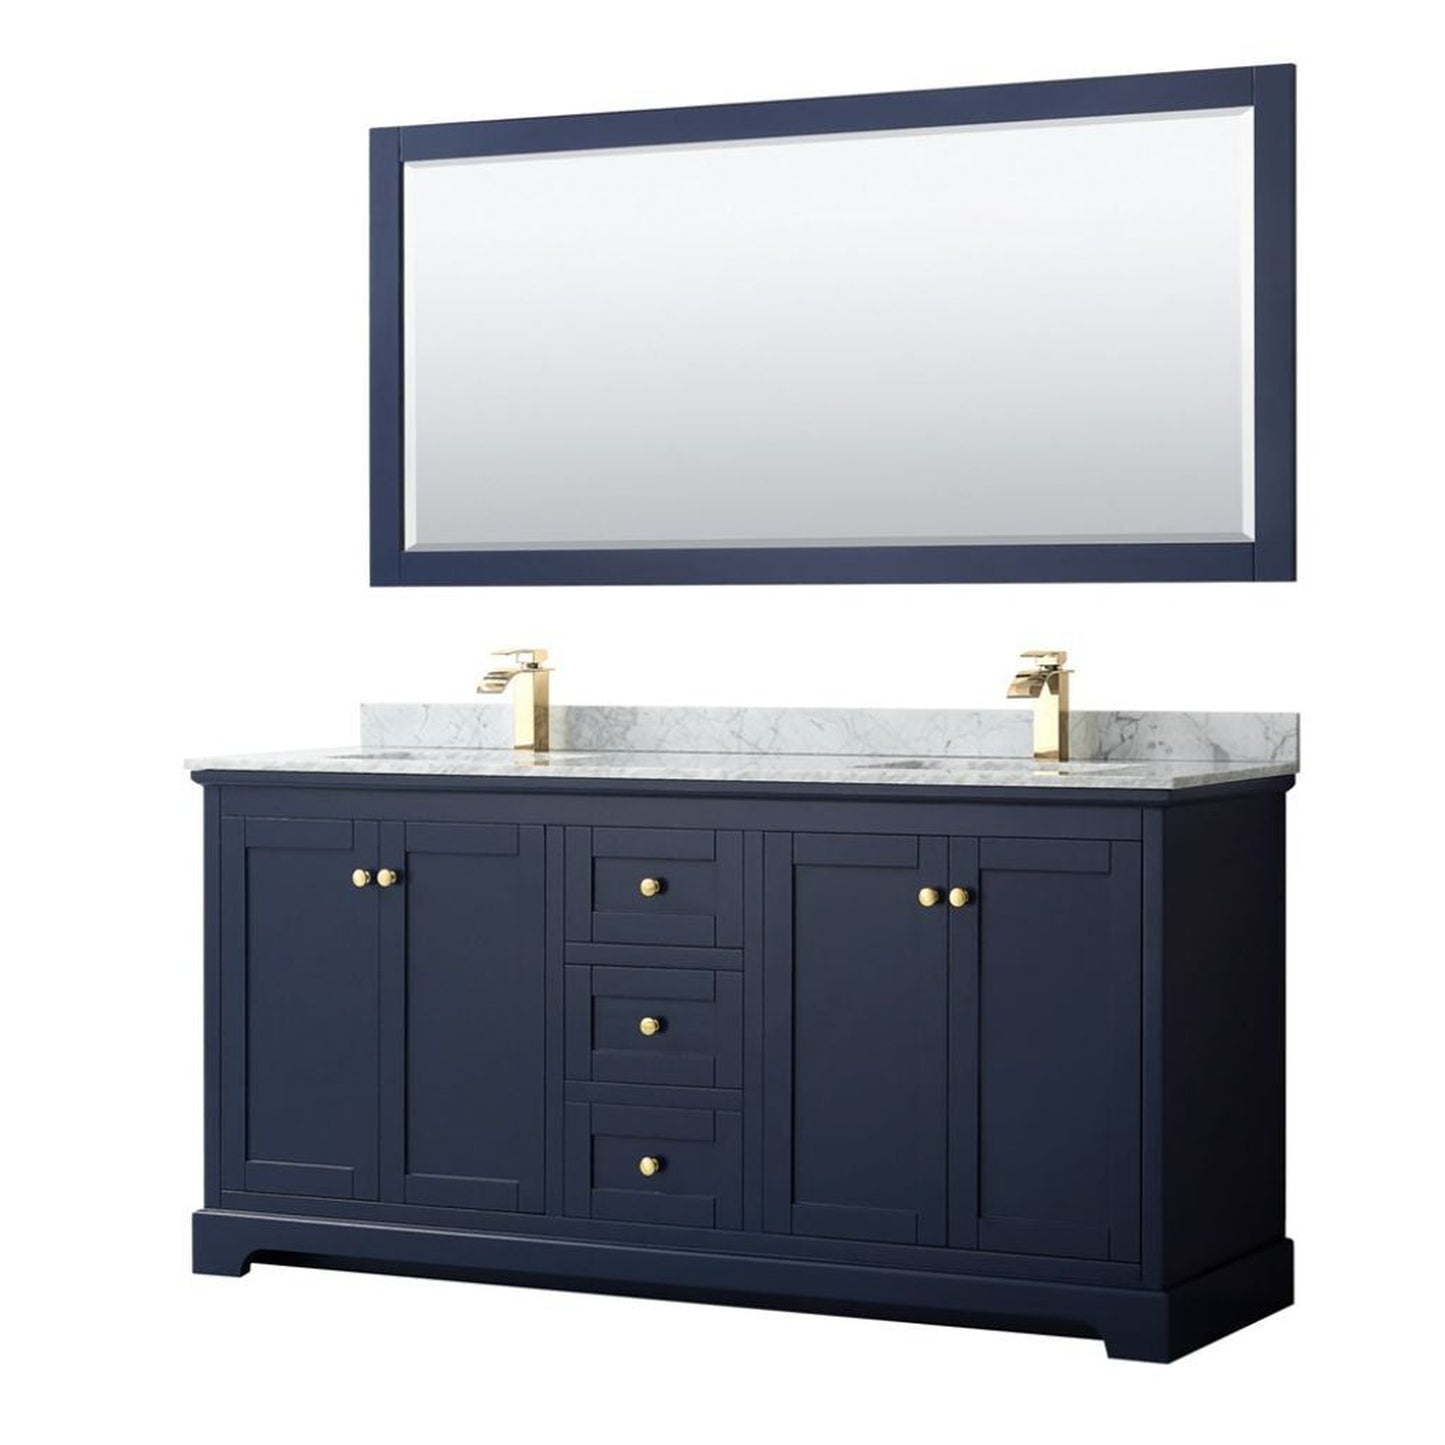 Wyndham Collection Avery 72" Dark Blue Double Bathroom Vanity Set With White Carrara Marble Countertop With 1-Hole Faucet And Square Sink And 70" Mirror